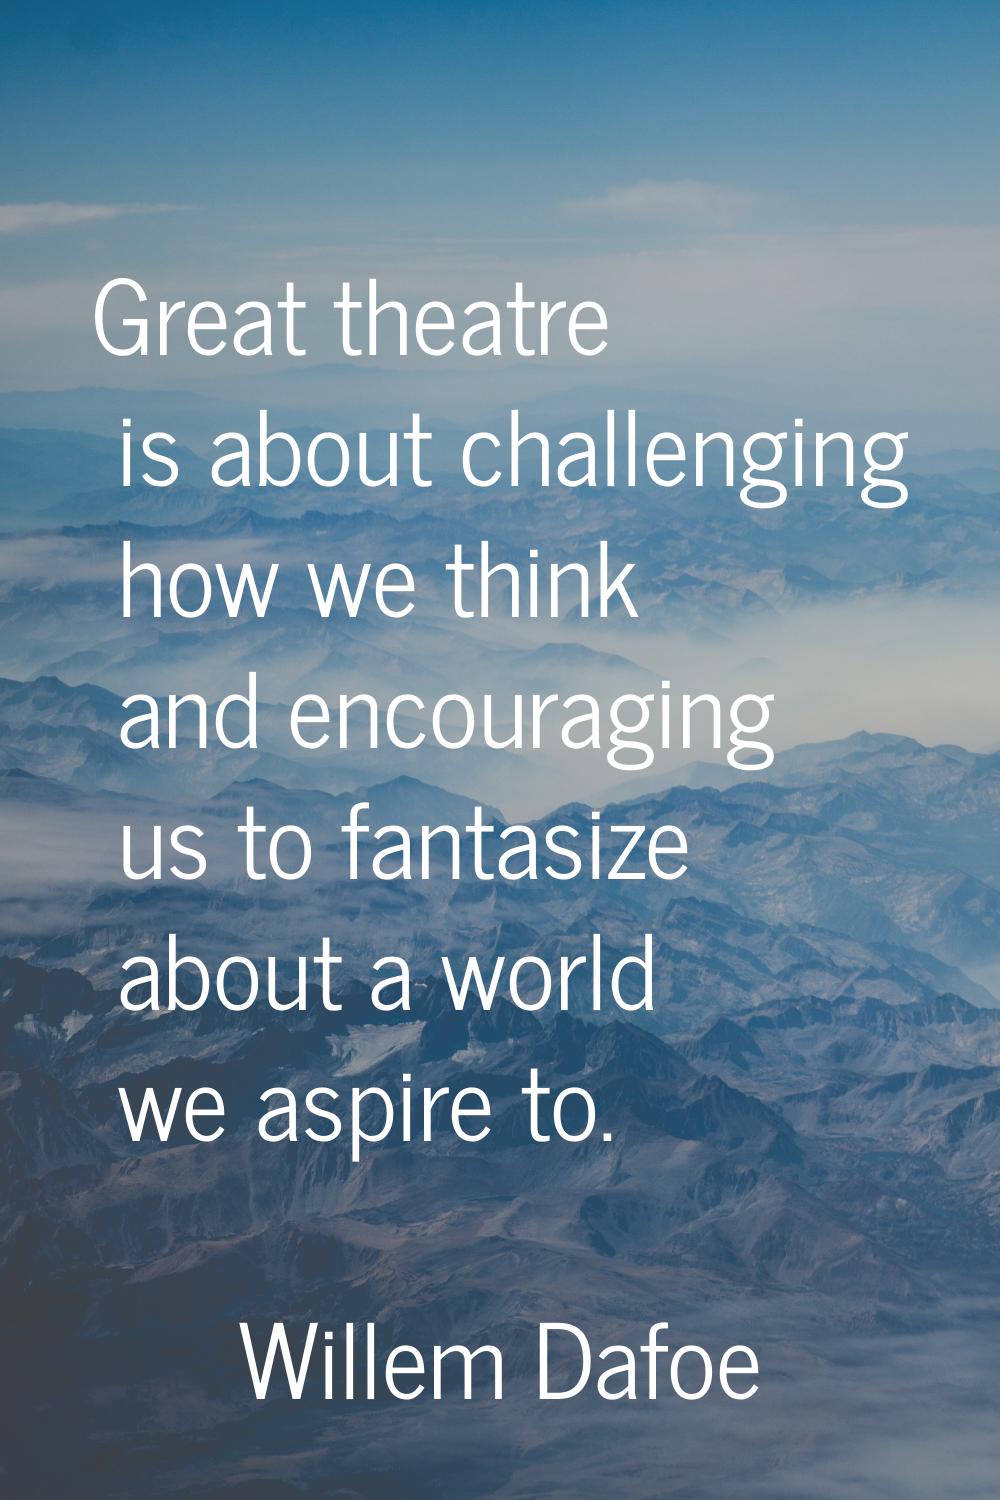 Great theatre is about challenging how we think and encouraging us to fantasize about a world we as